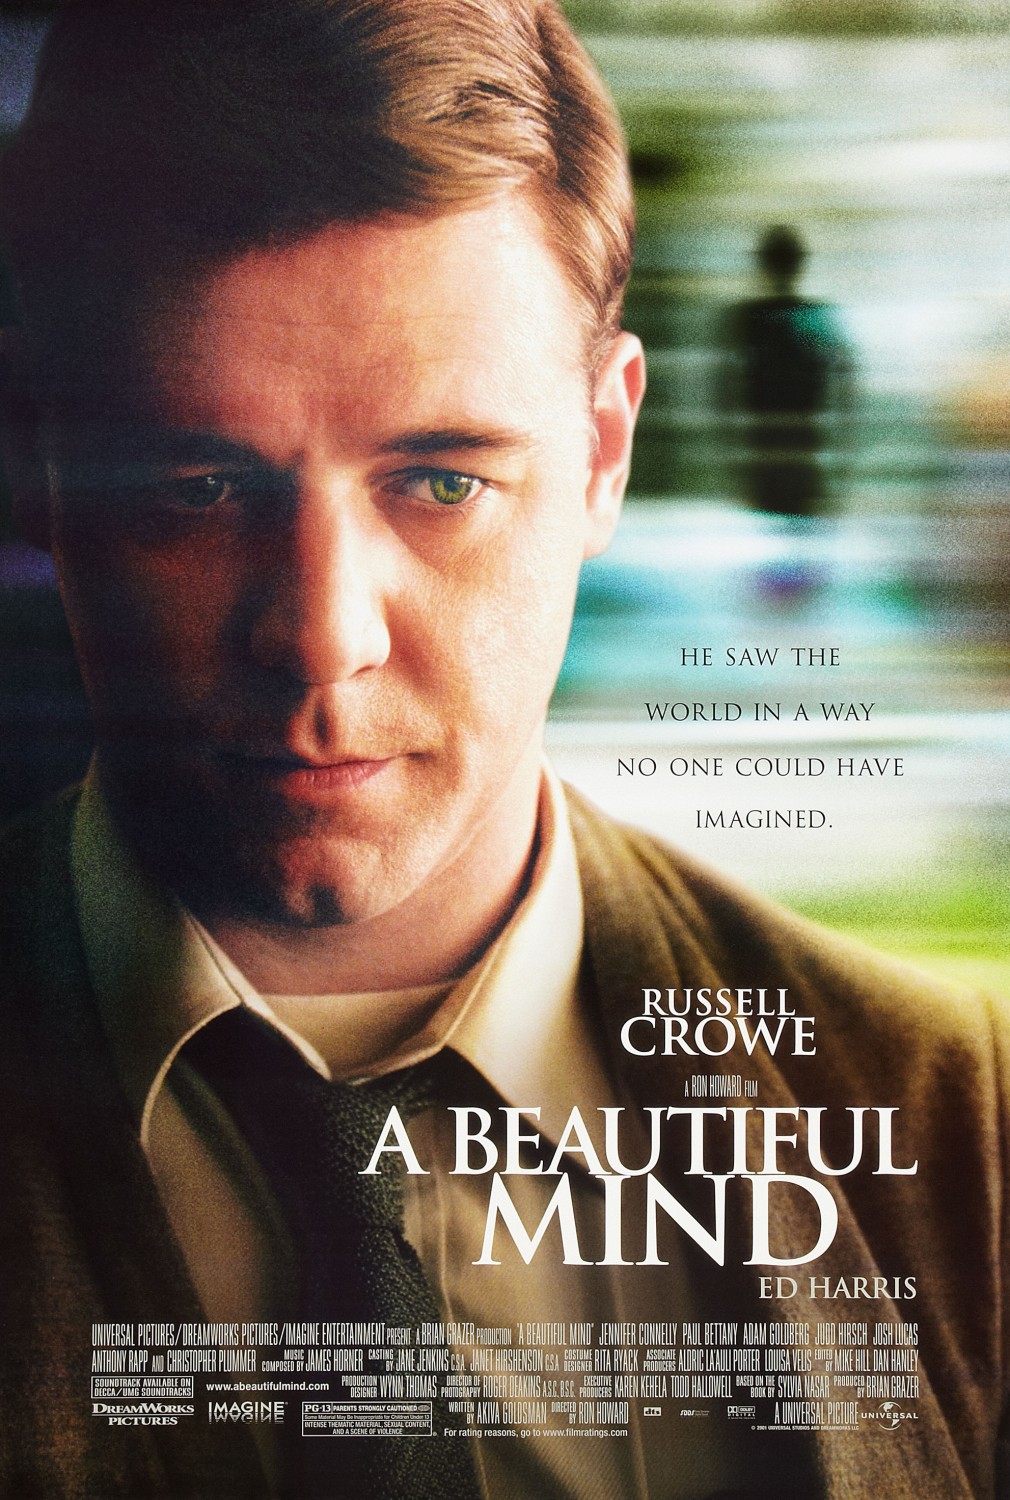 Movie Review: "A Beautiful Mind" (2001)